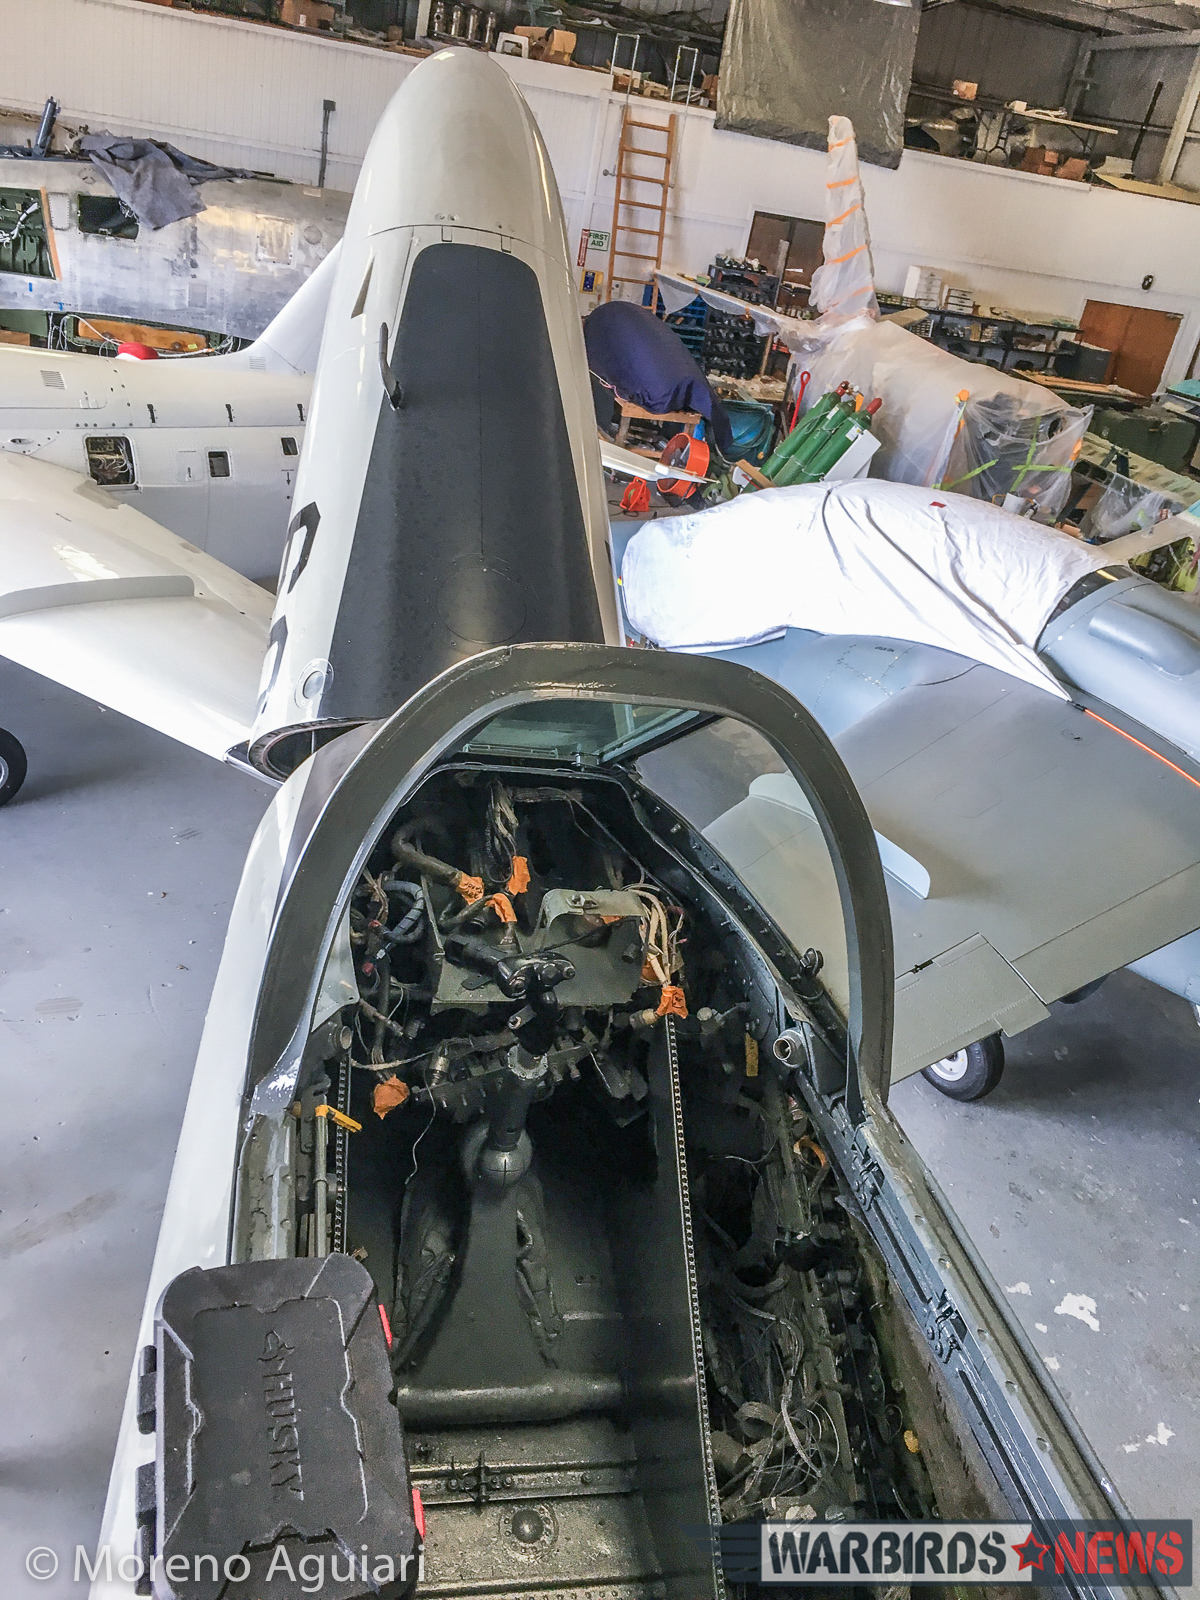 Rewiring the TA-4J's cockpit at Classic Fighters of America's hangar. (photo by Moreno Aguiari)